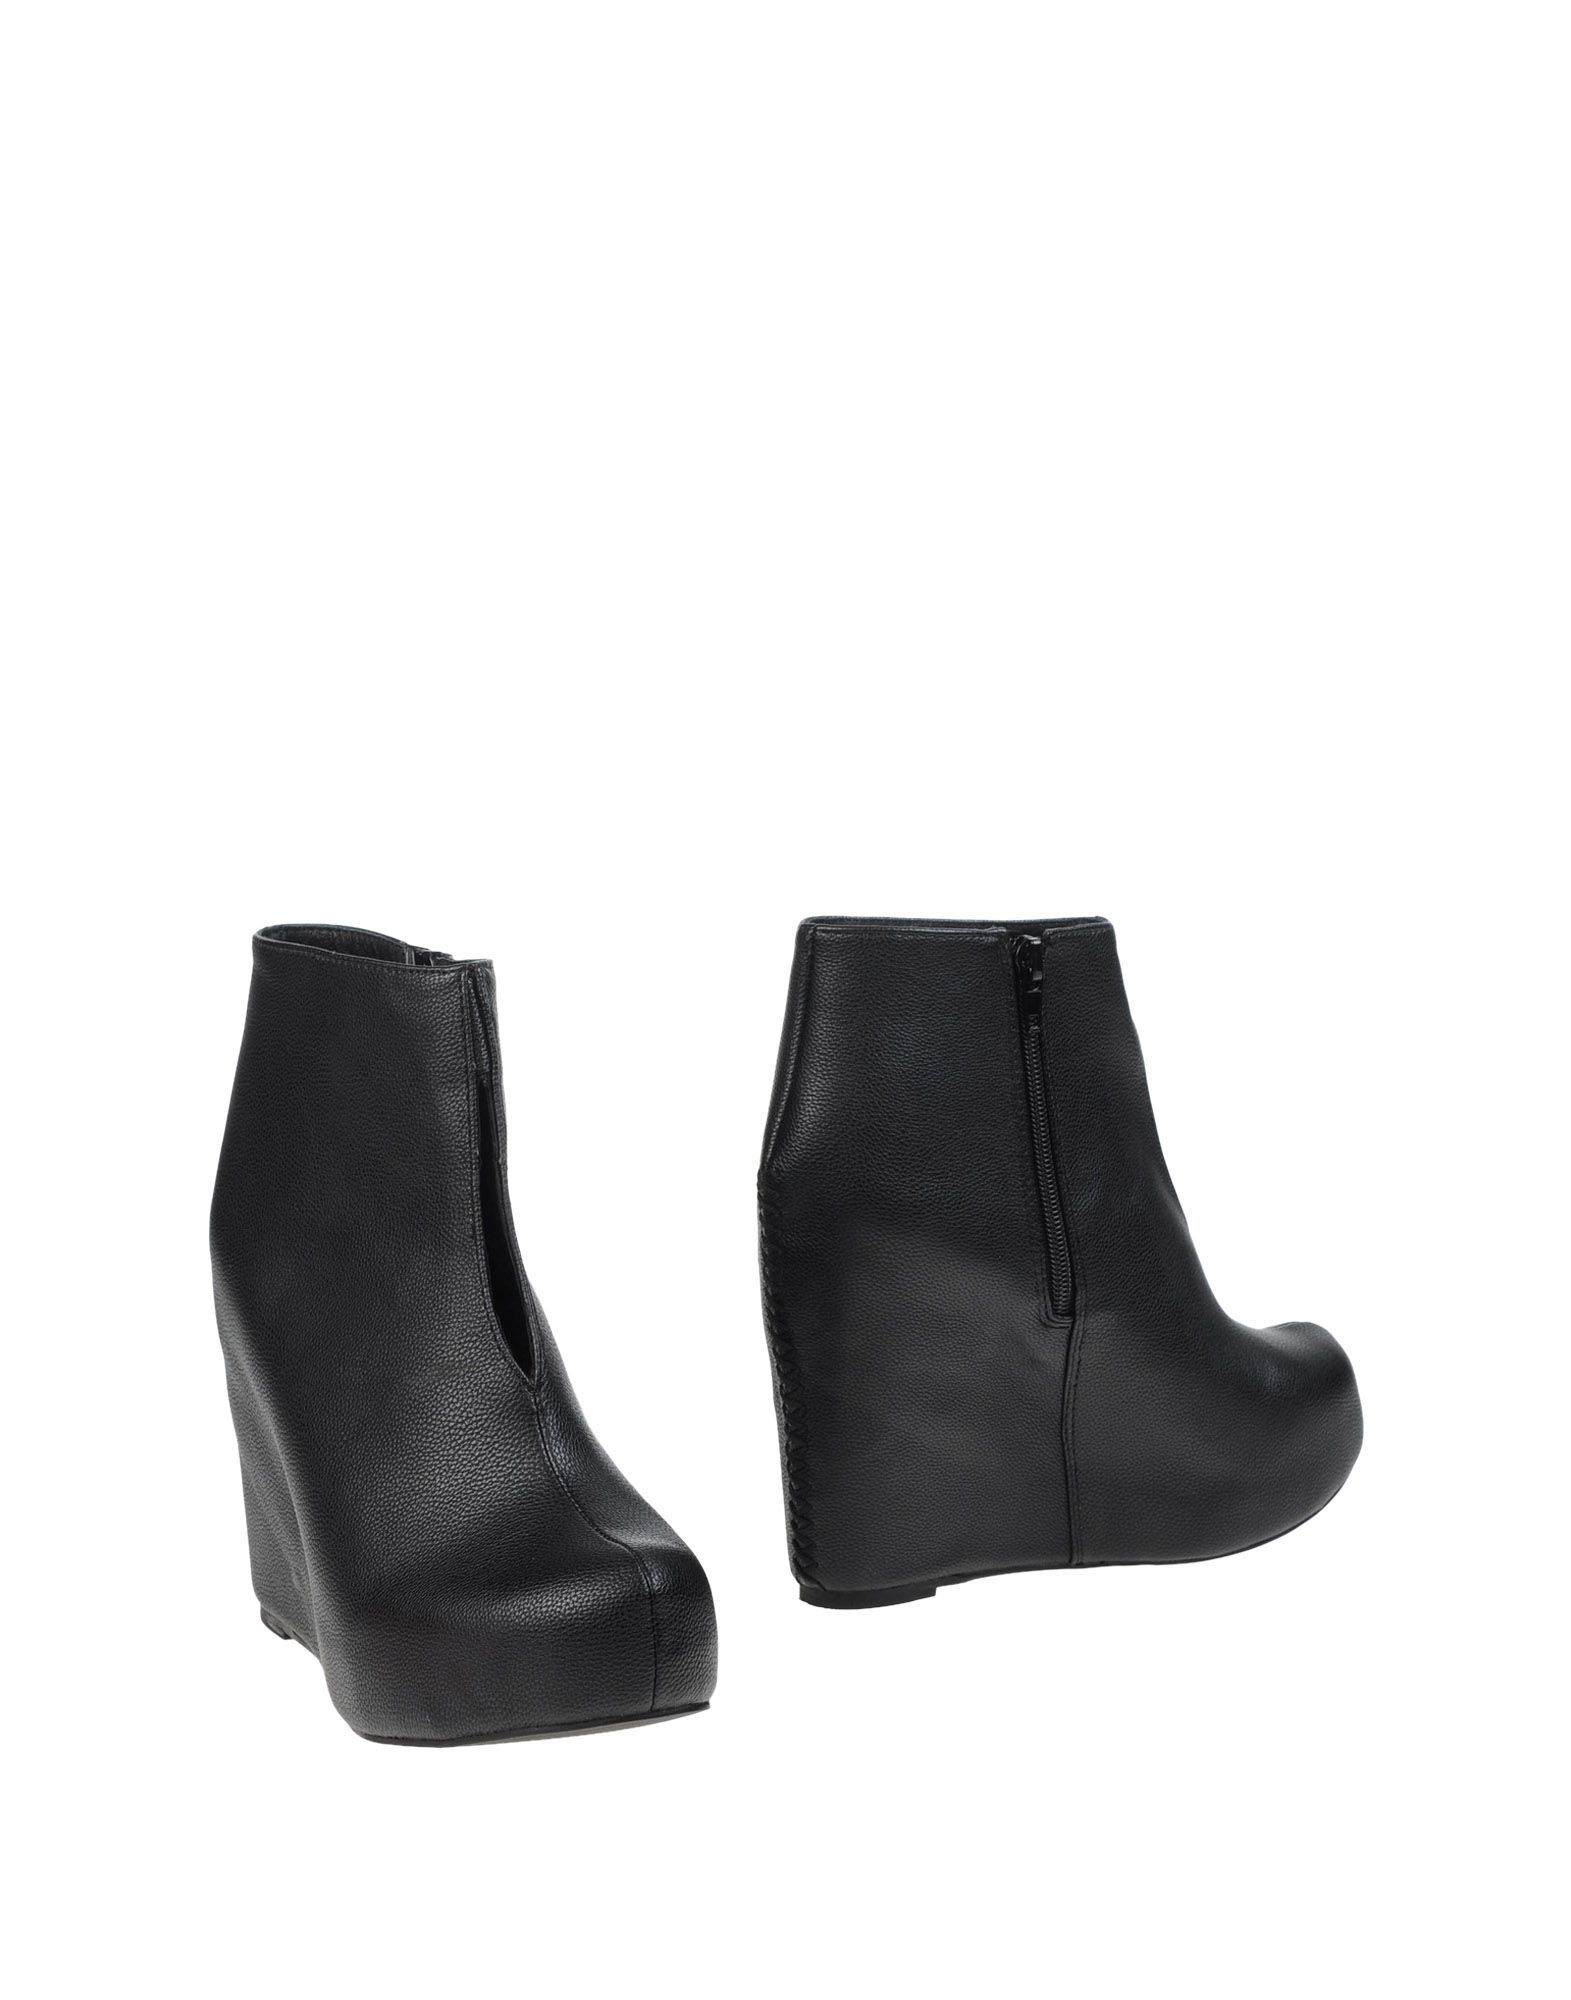 JEFFREY CAMPBELL Ankle boots - Item 44826456 | YOOX (US)